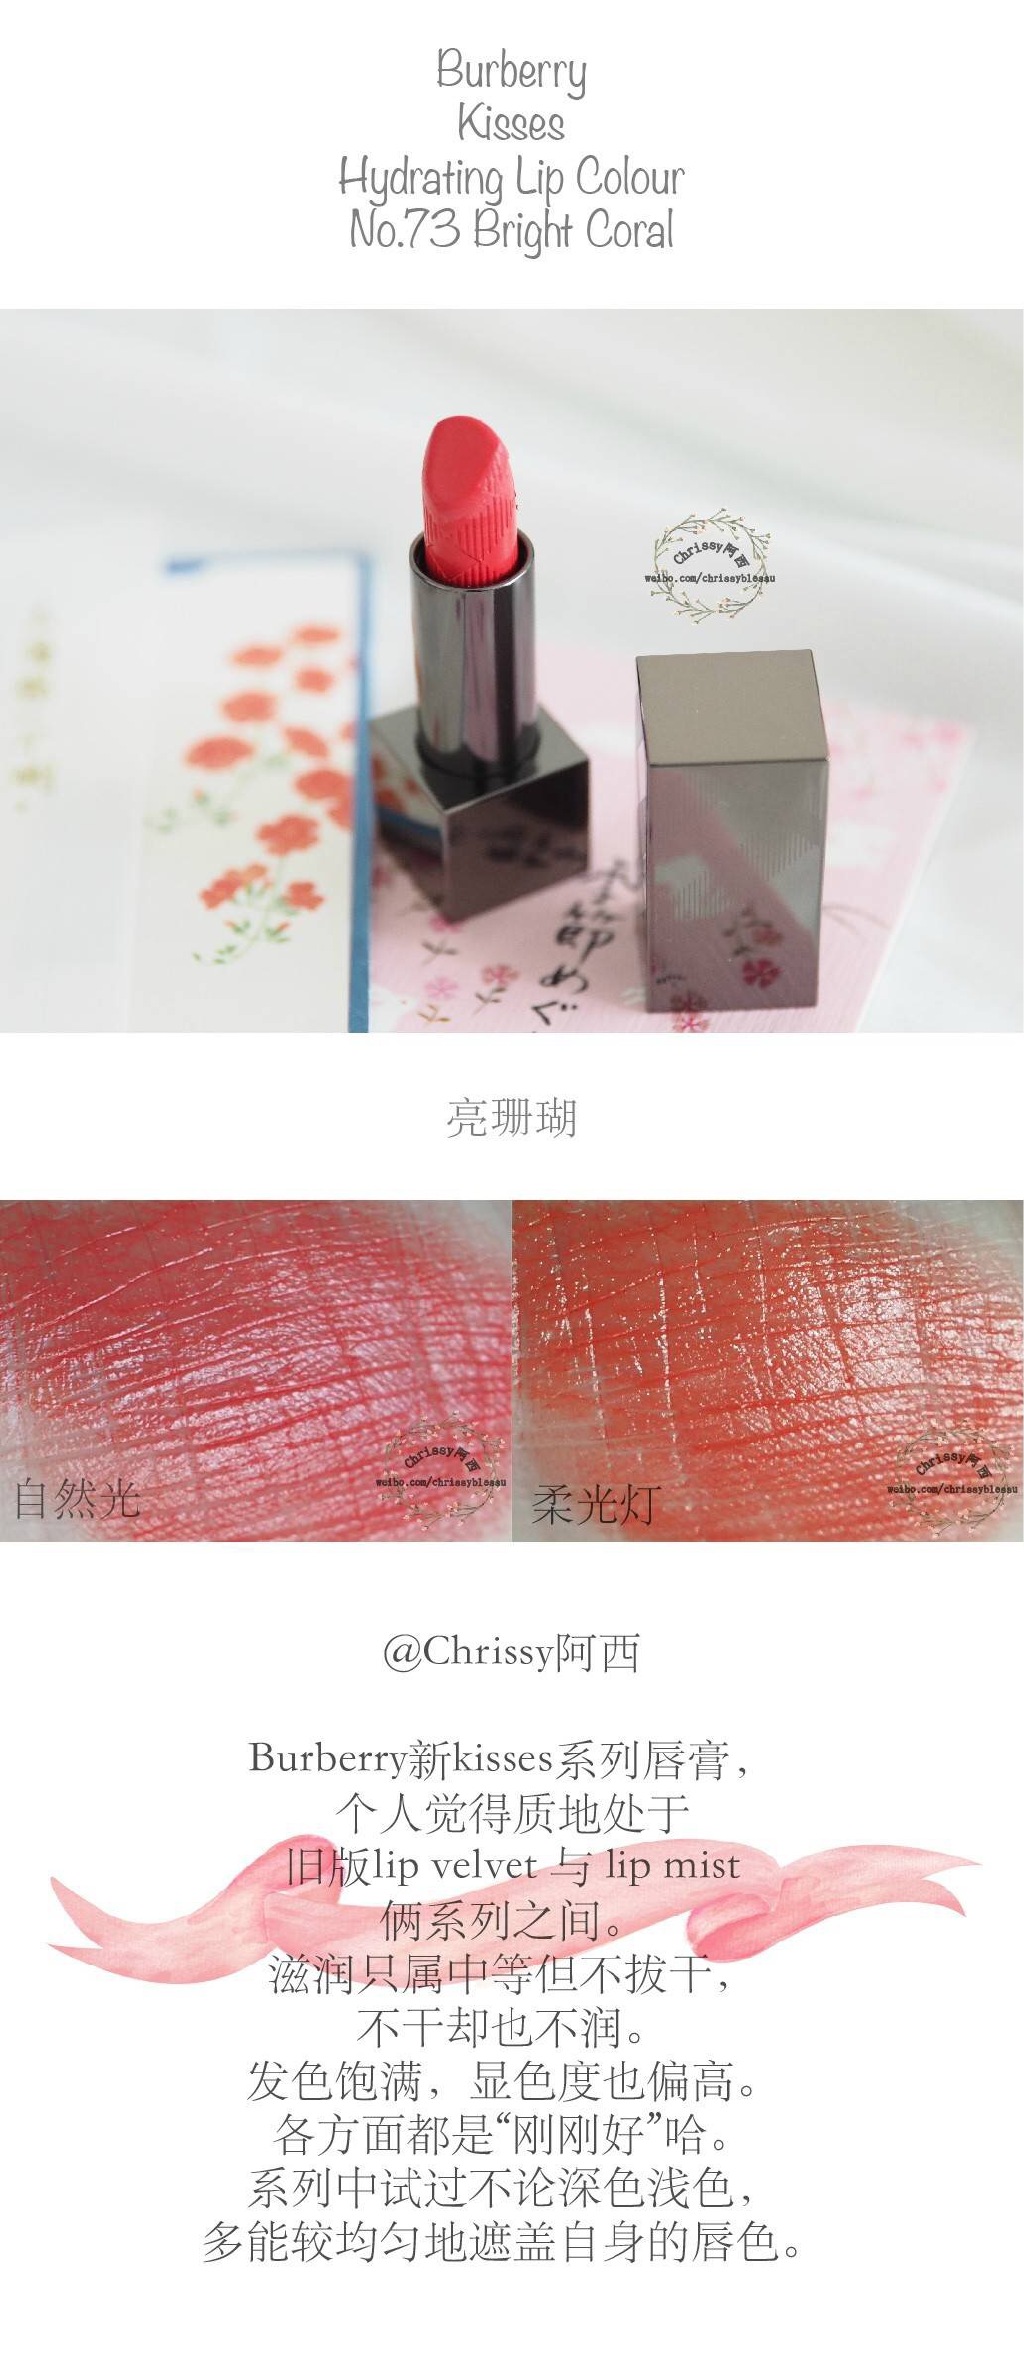 Burberry Kisses 唇膏色号73试色（Burberry Kisses Hydrating Lip Colour No.73 Bright Coral）